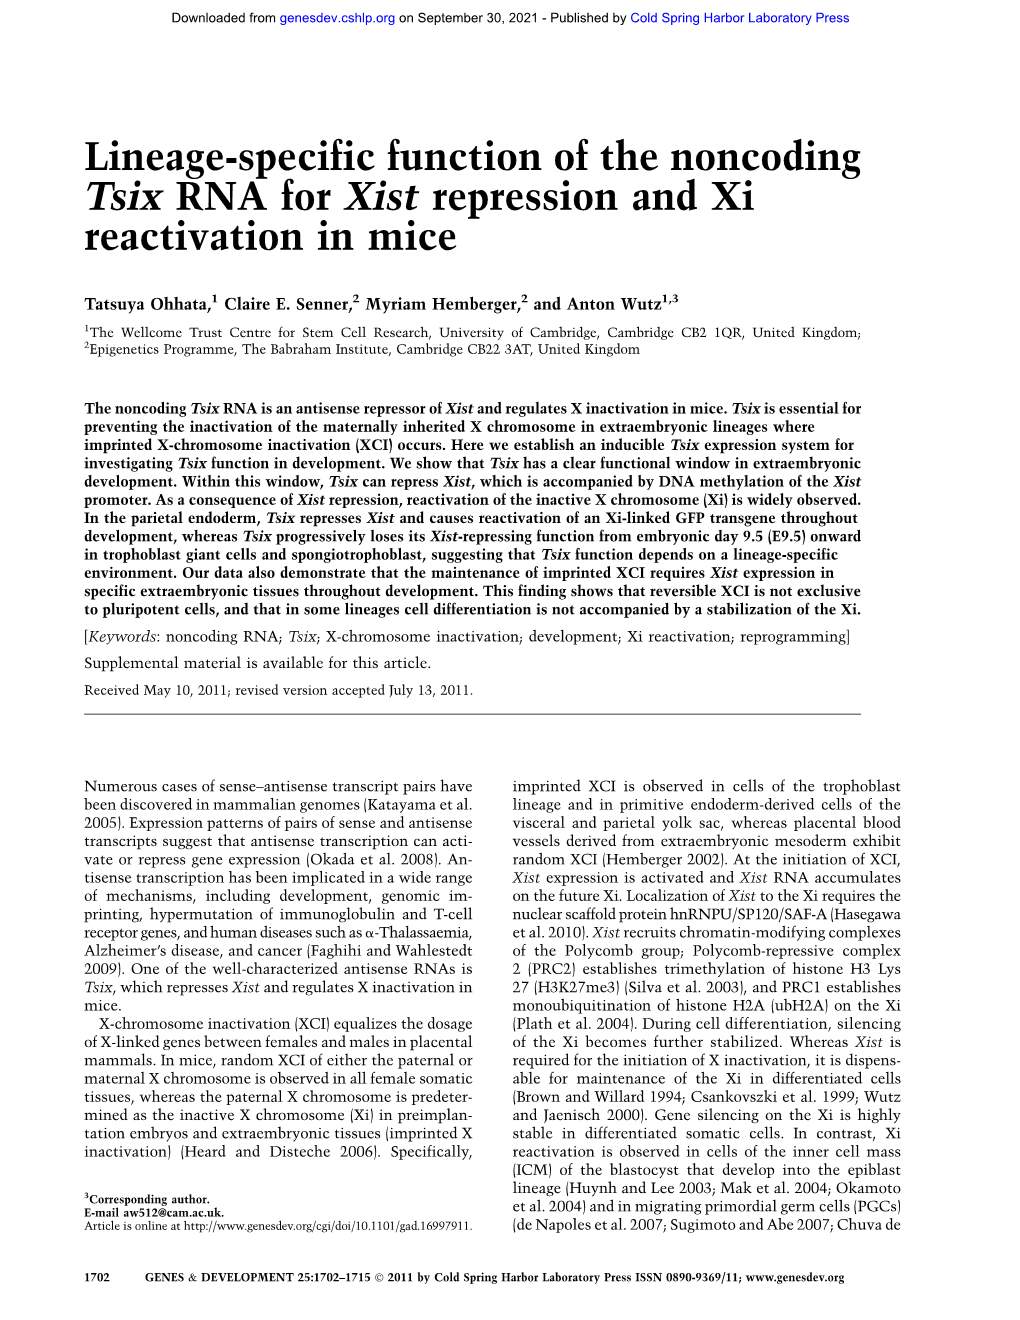 Lineage-Specific Function of the Noncoding Tsix RNA for Xist Repression and Xi Reactivation in Mice